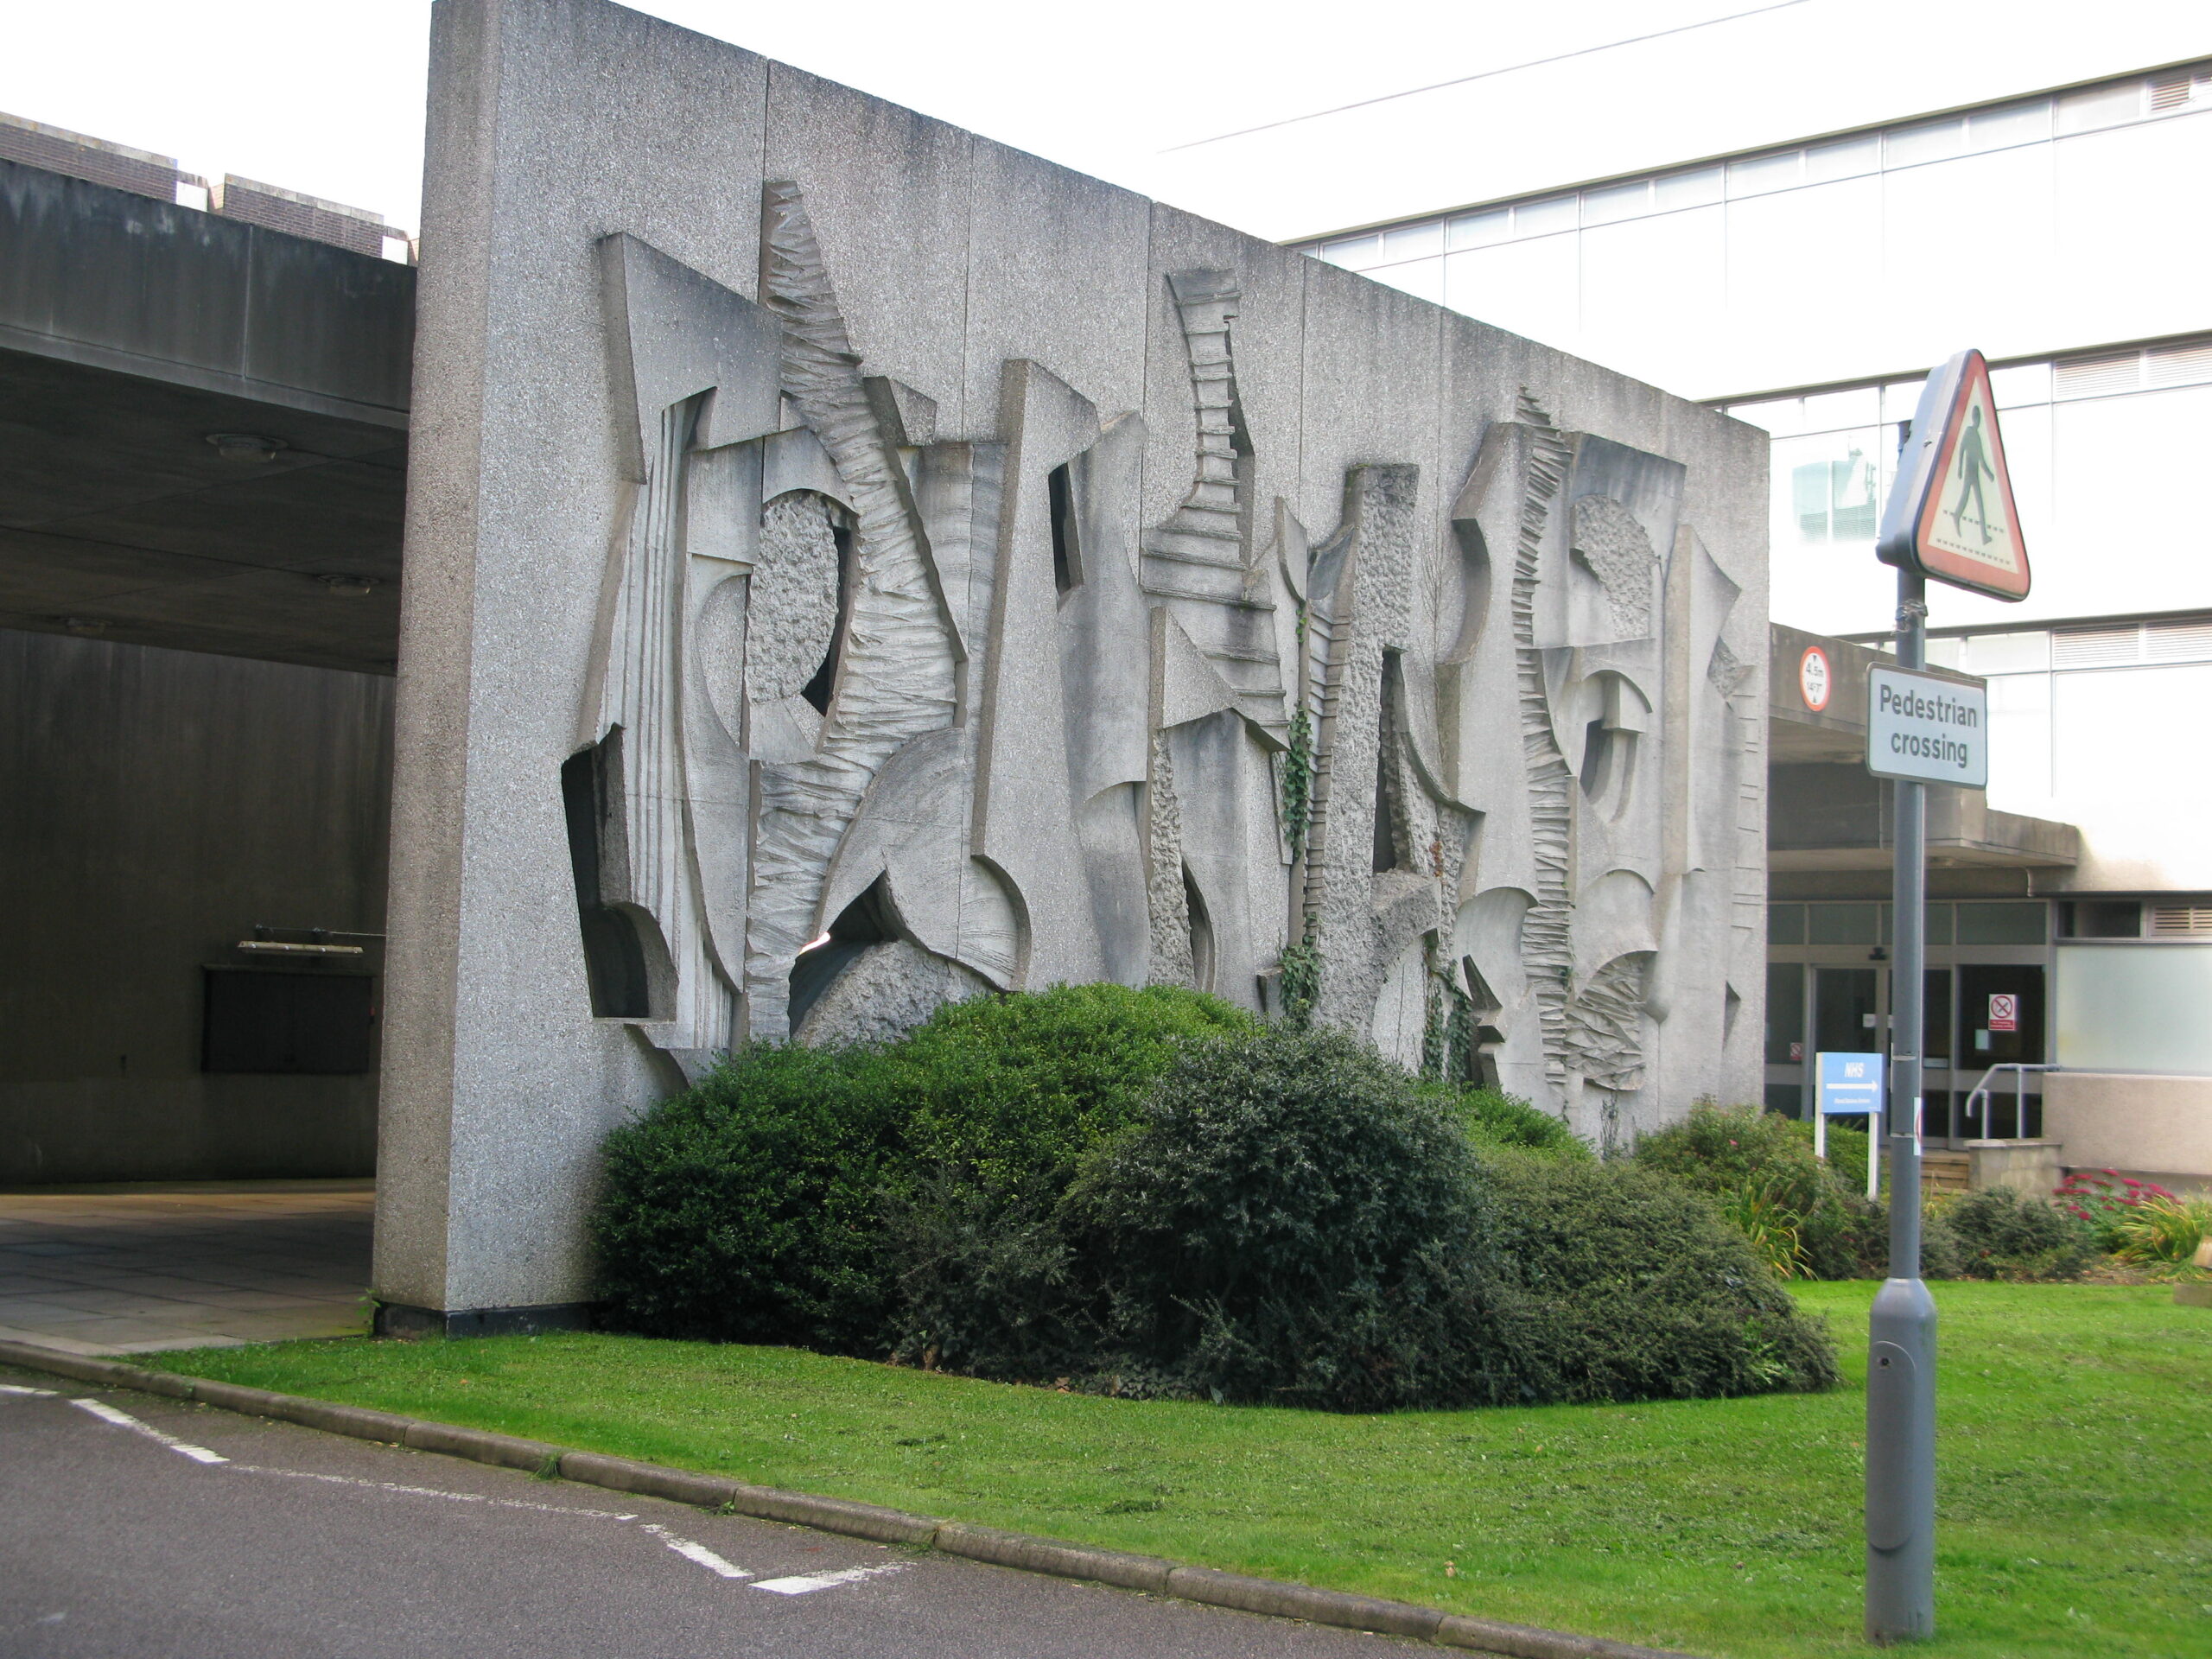 Port Cochere and concrete mural on 6 Oct 2010